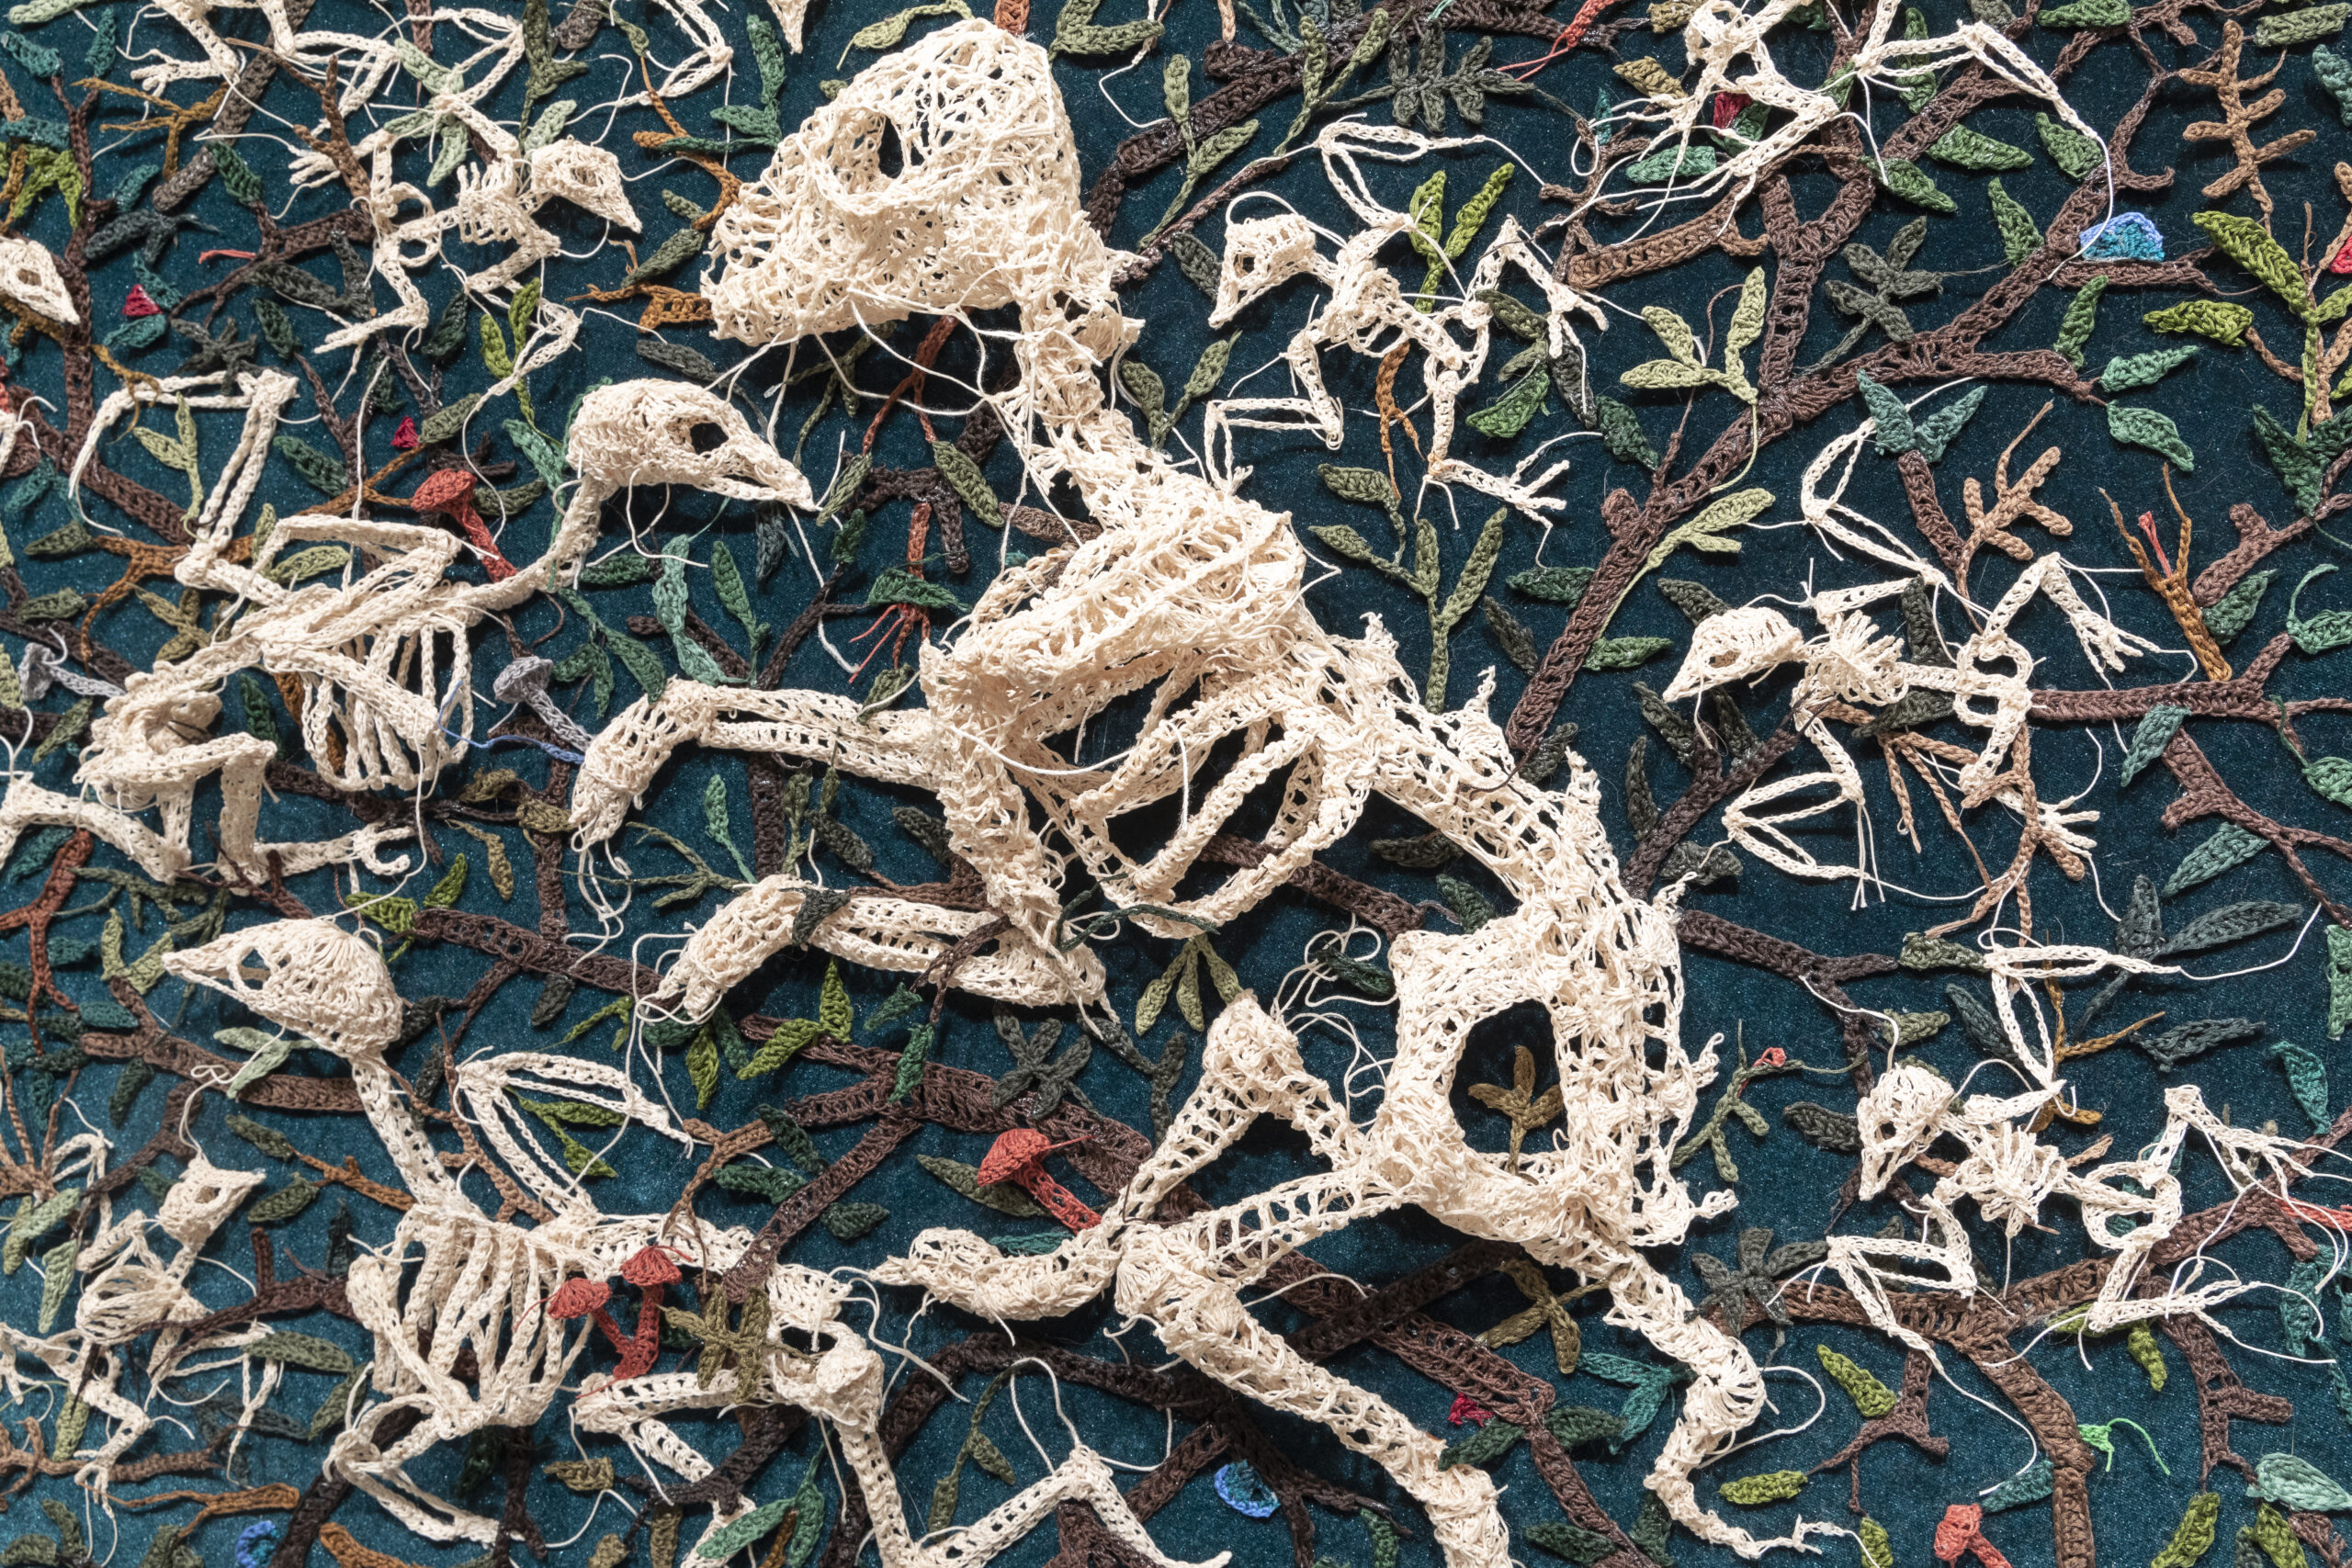 A close up of a piece of embroidery artwork, depicting off-white dinosaur skeletons emerging from and tangled up in a tree.